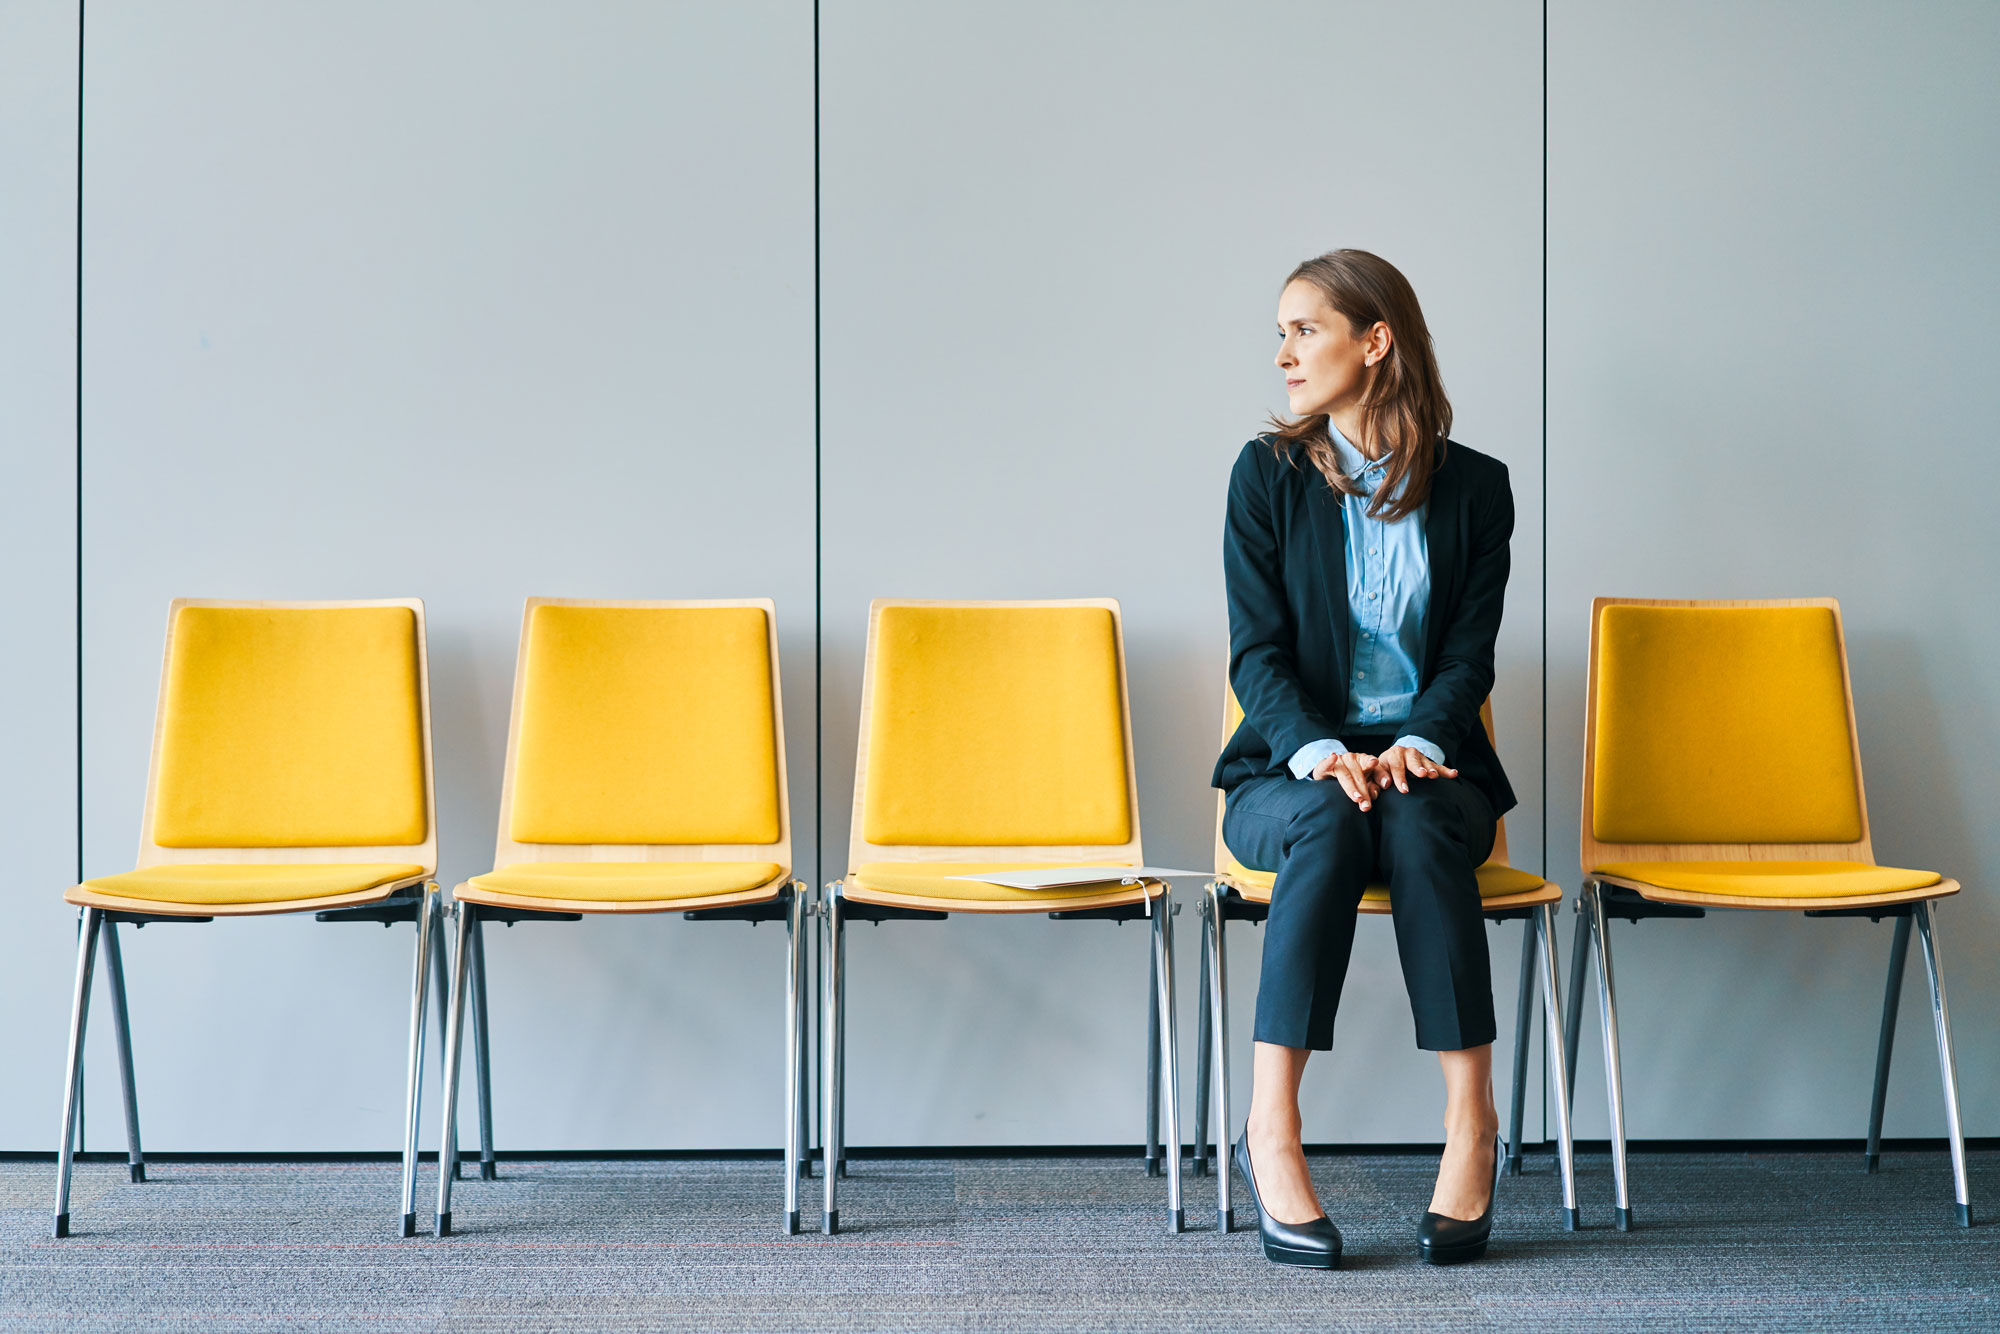 photo - Woman Waiting for a Job Interview